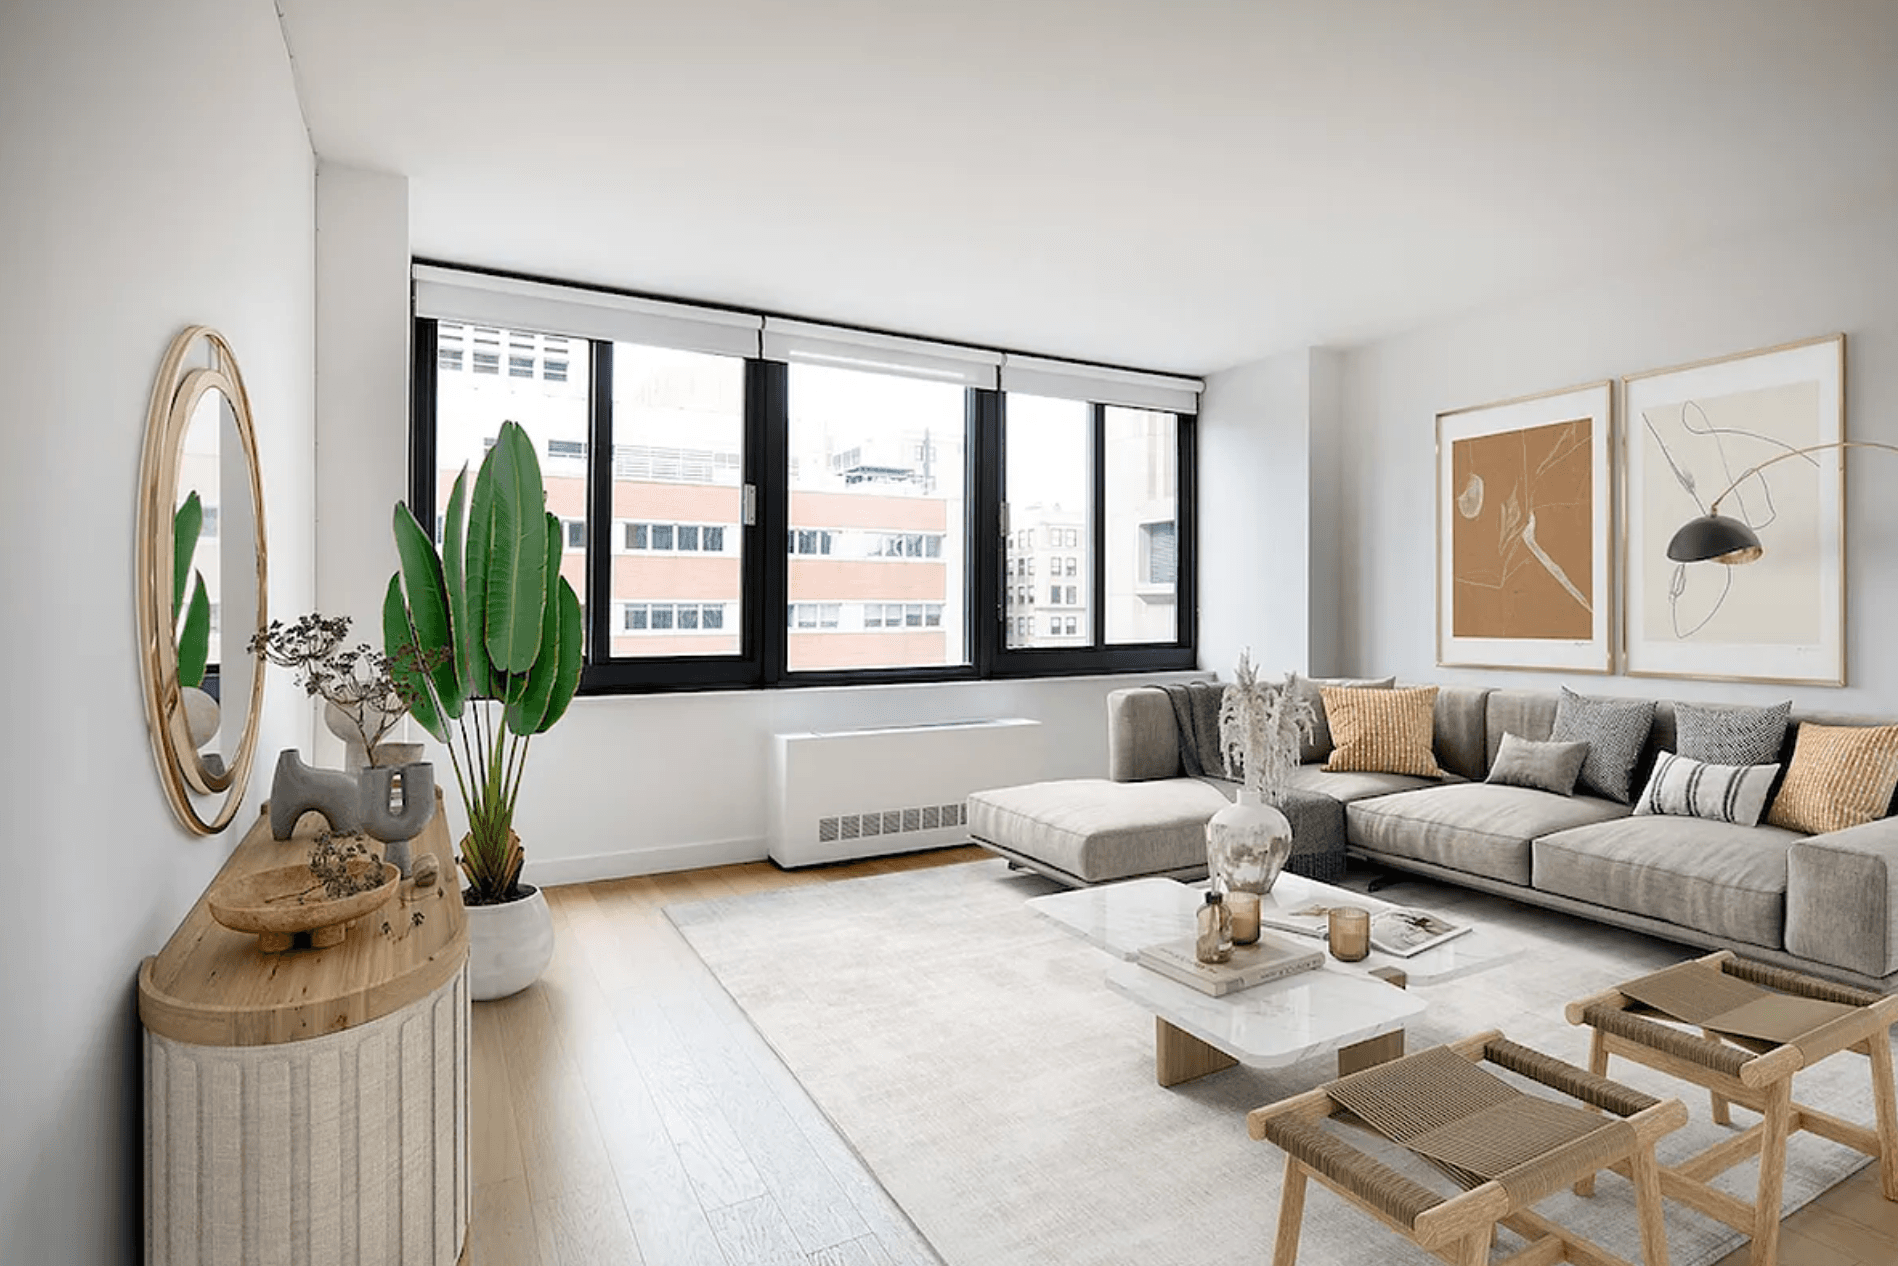 STUNNING 1 BED 1 BATH IN PRIME TRIBECA